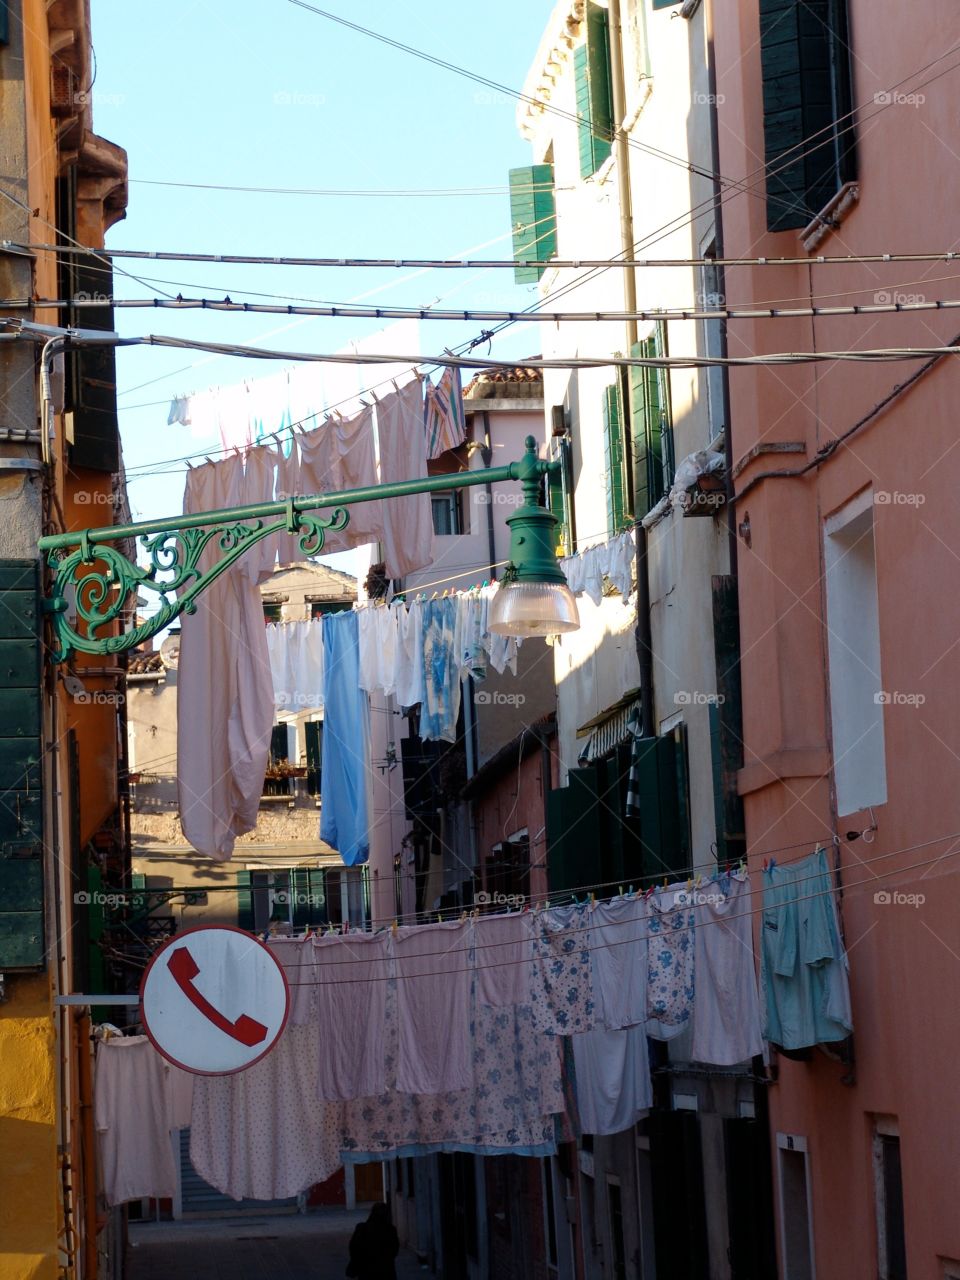 Hanging clothes, Venice